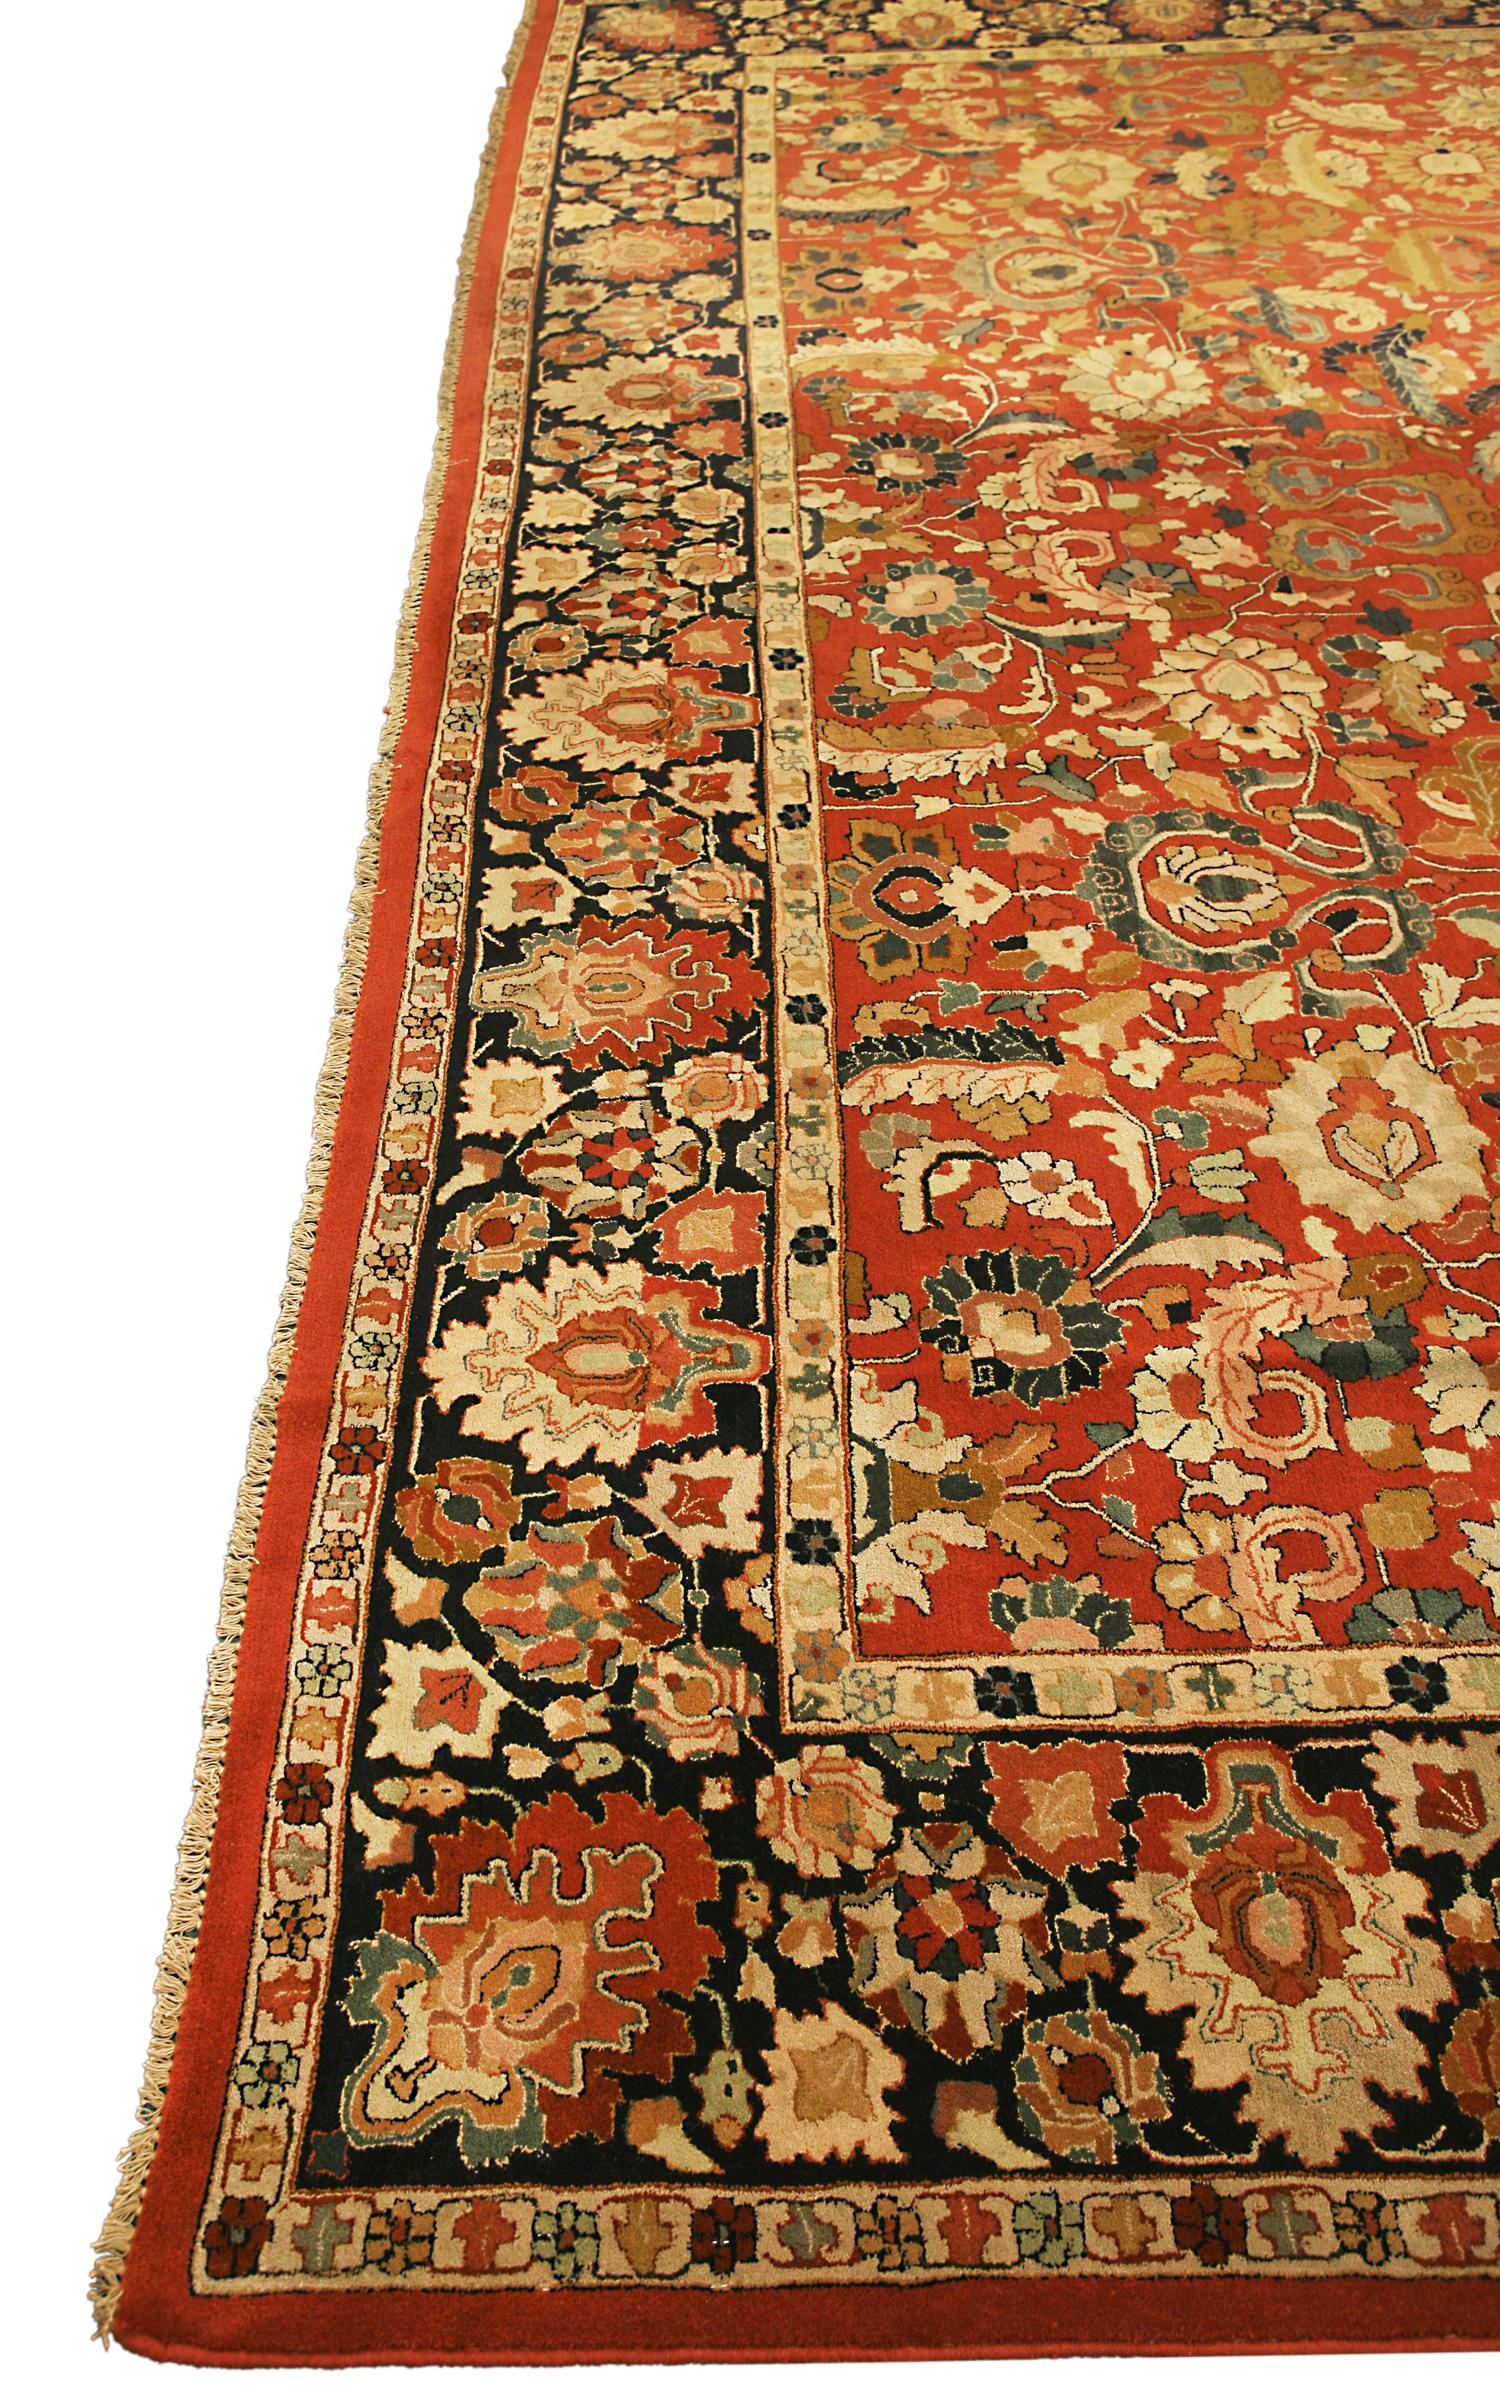 Wool Floral All-Over Field Massive Antique German Rust Tetex Carpet, ca. 1920 For Sale